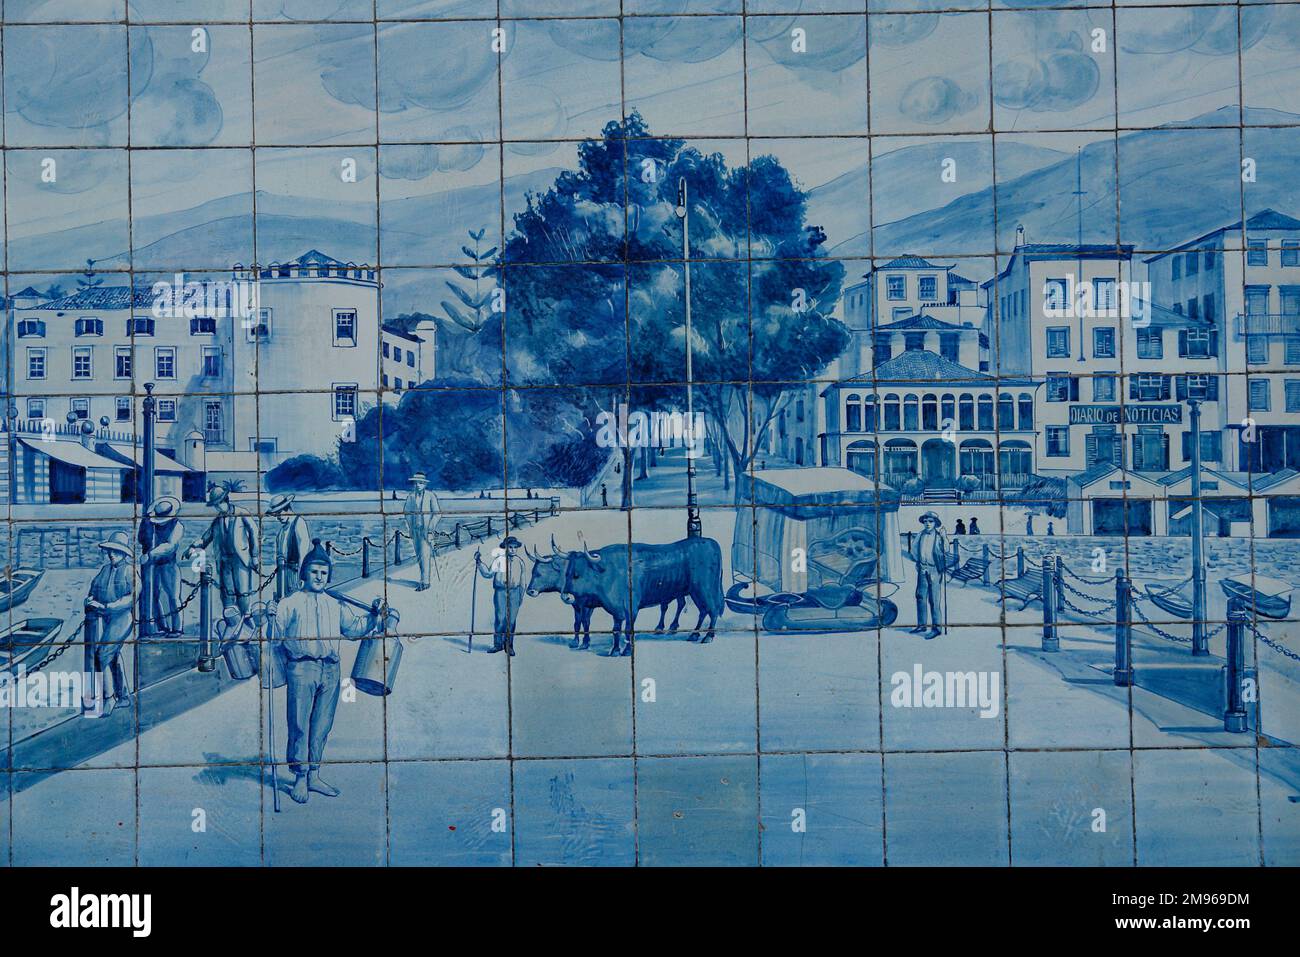 A picture on blue tiles outside the former Ritz Cafe, in the Avenida Arriaga in Funchal, Madeira, Portugal. This type of traditional design, on blue and white tin-glazed ceramic tiles, is known in Spain and Portugal as azulejo or azulejos. Stock Photo